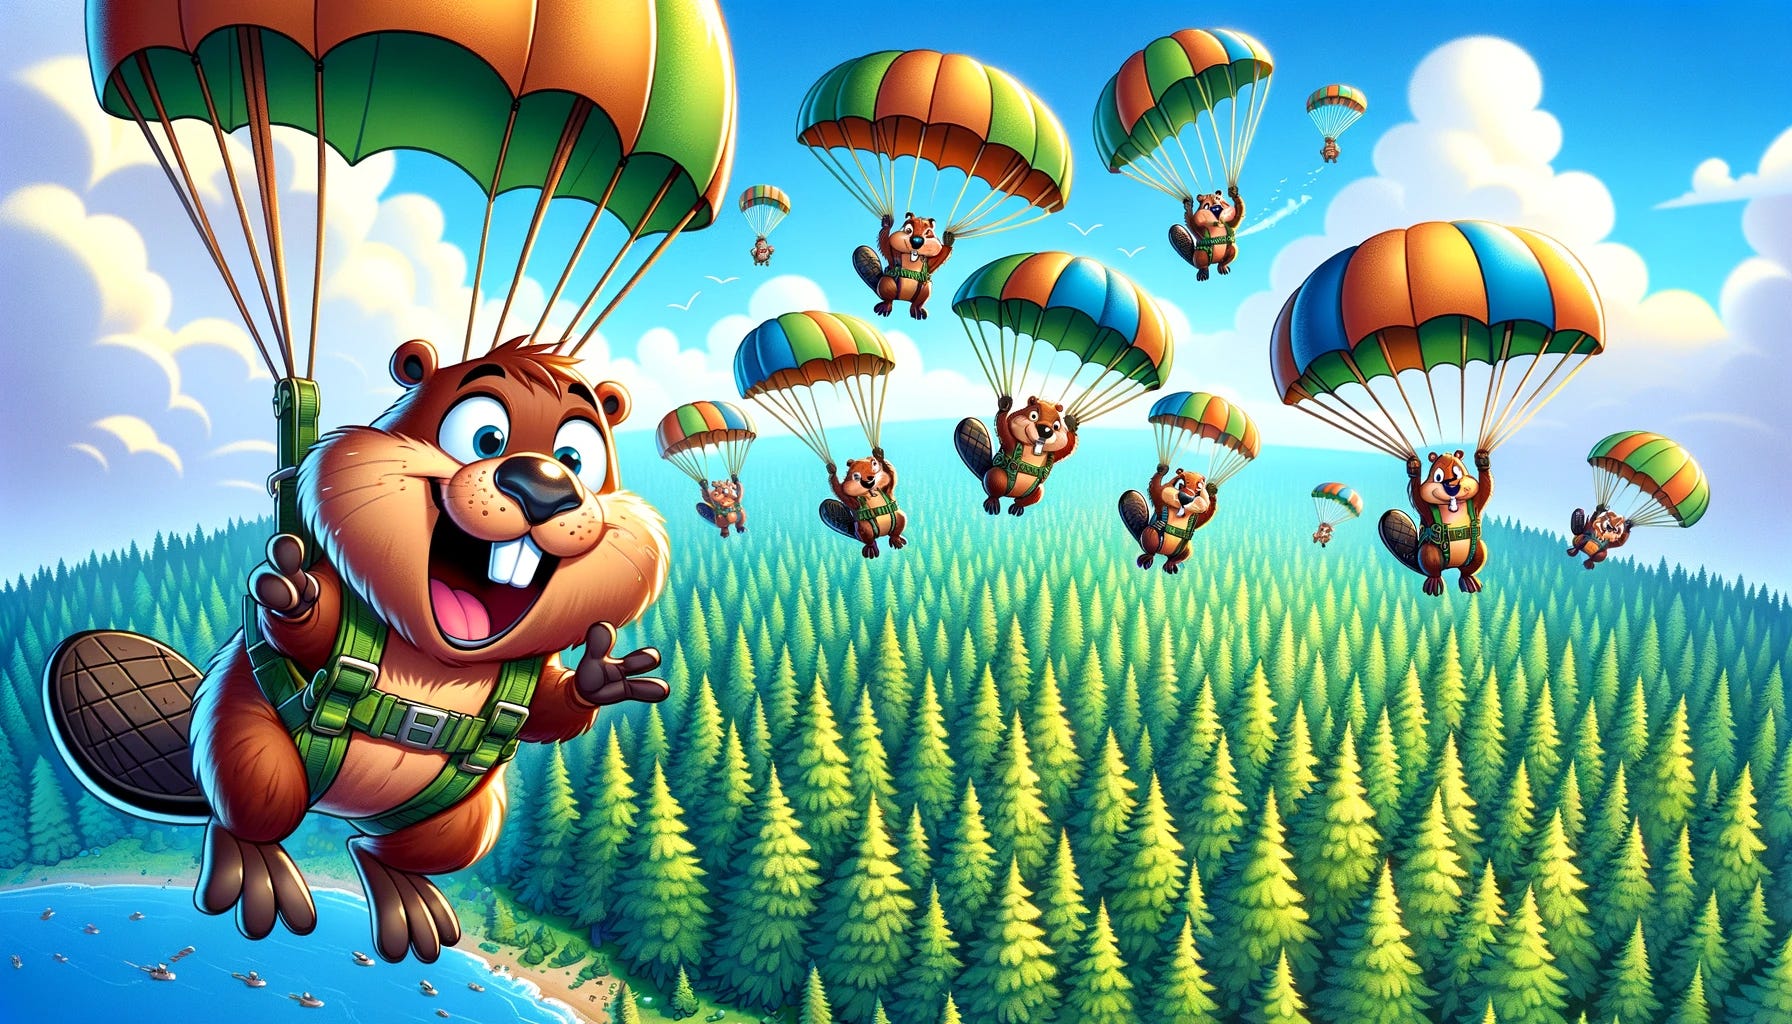 A cartoon scene featuring several beavers parachuting into a dense forest. The beavers, each with a different expression of excitement and surprise, are equipped with colorful parachutes. The forest is lush with a variety of trees, such as pines and oaks, and the sky is bright blue with fluffy white clouds. The perspective is from above, showing the beavers descending towards the treetops. The image should have a playful, vibrant color scheme, highlighting the whimsical nature of the scene.